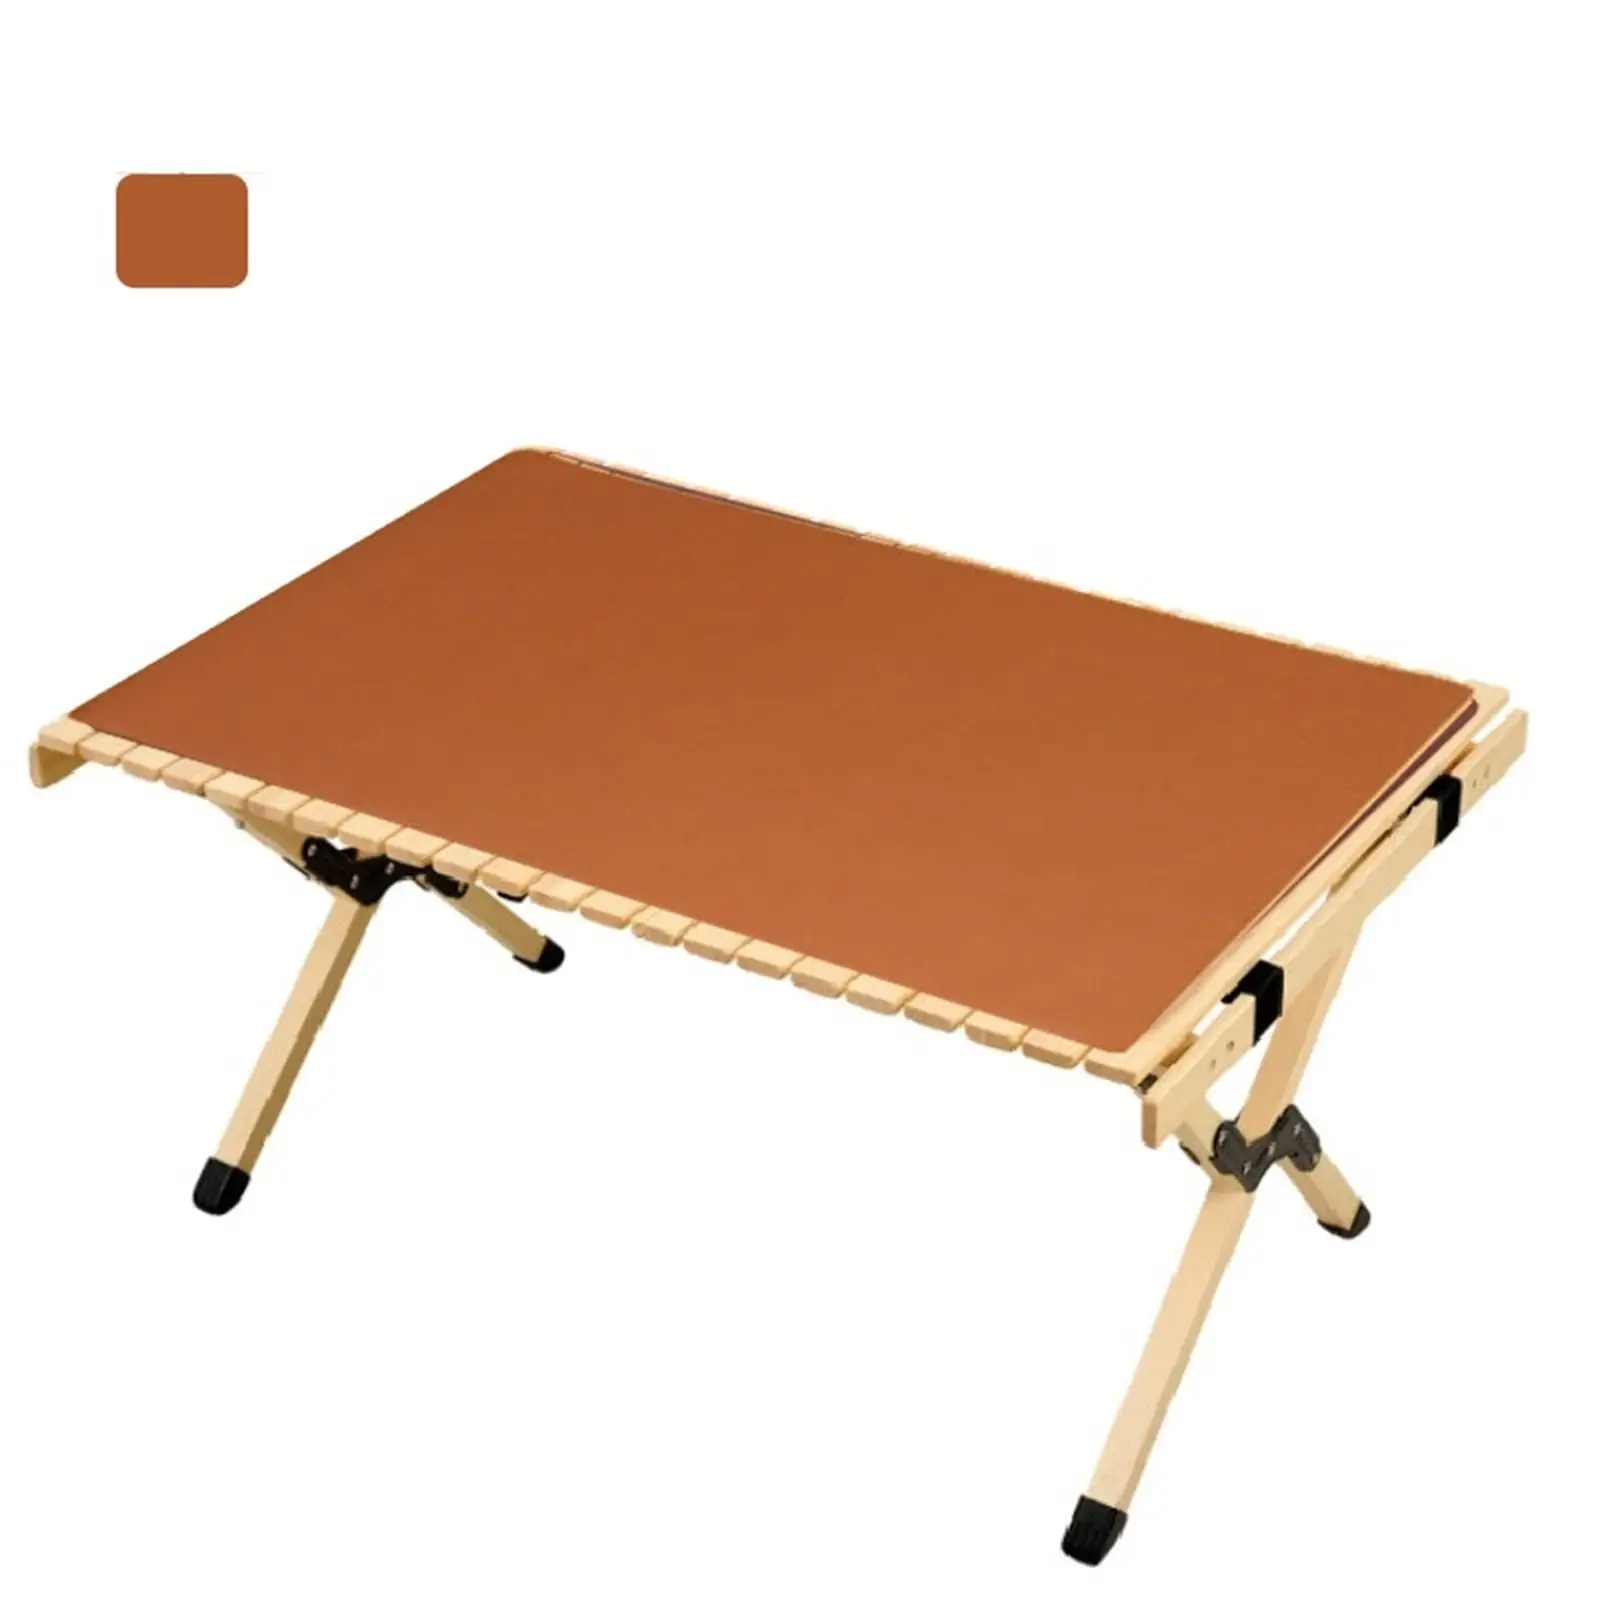 PU Leather Table Mat Outdoor Waterproof Oil proof camping Picnic pad Heat Insulation Mats Kitchen Table Pad